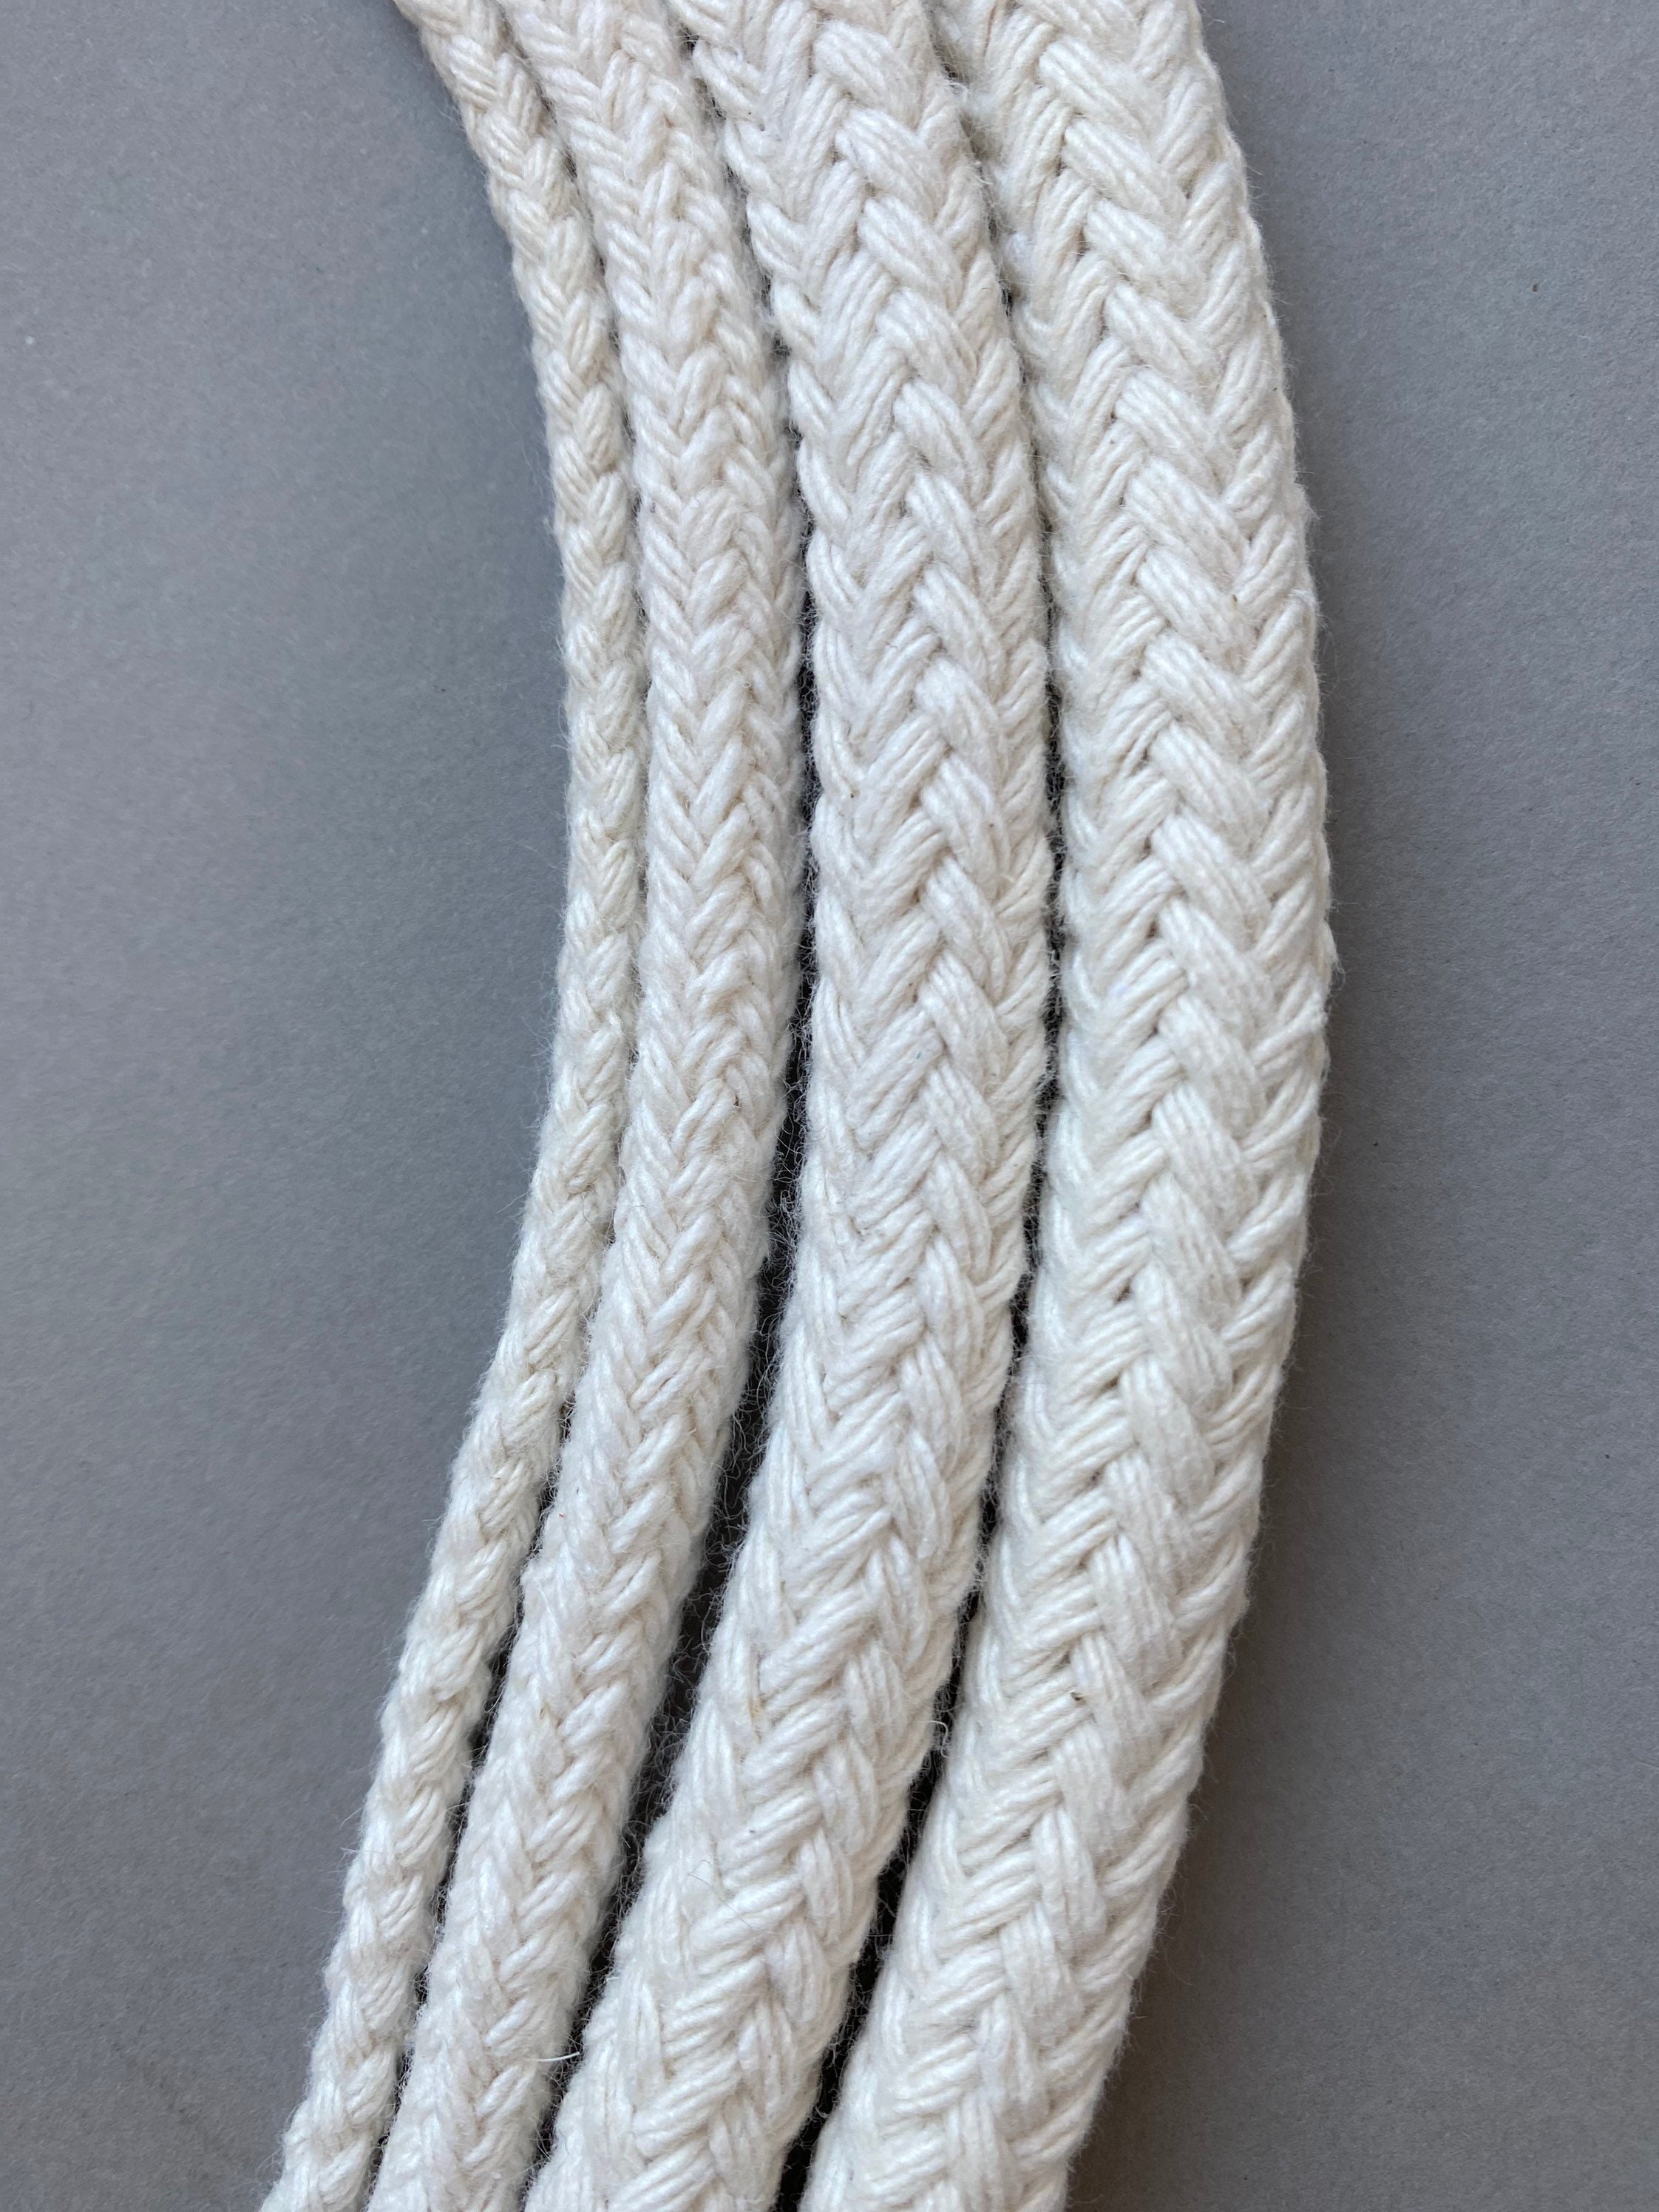 Braided Cotton Rope Macramé Crafting Cord off White Cotton Rope